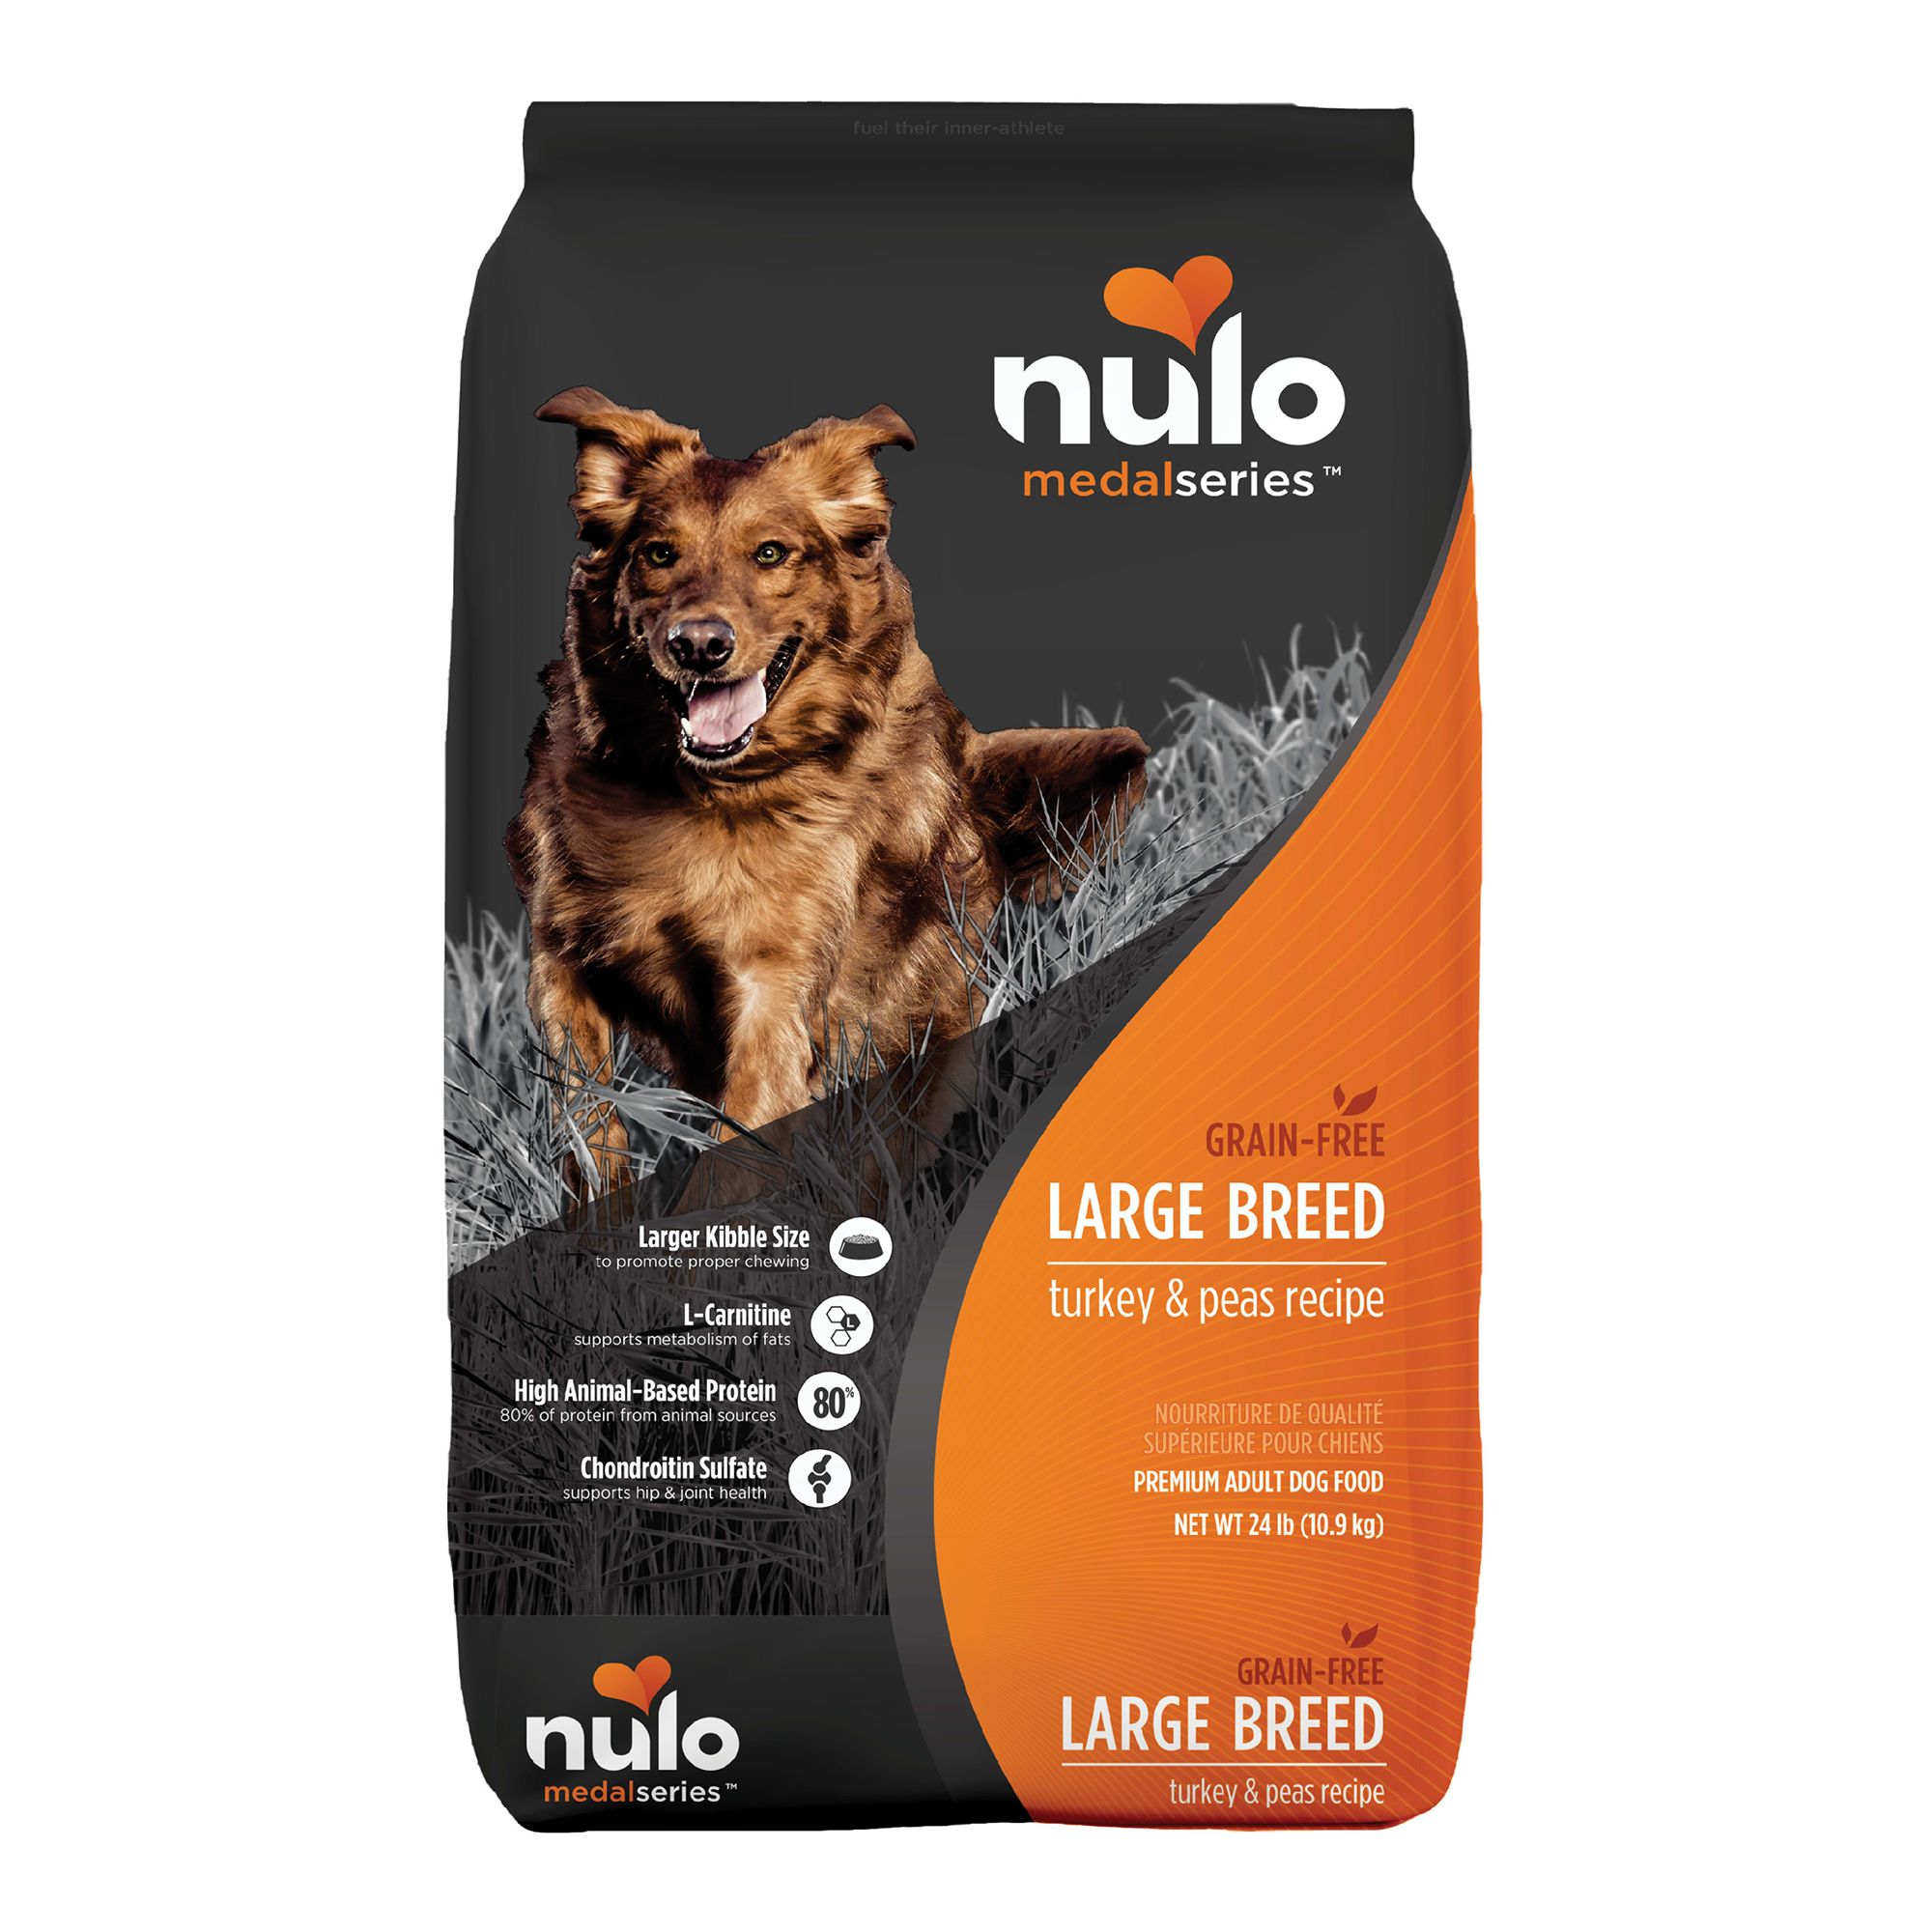 nulo dog food coupons